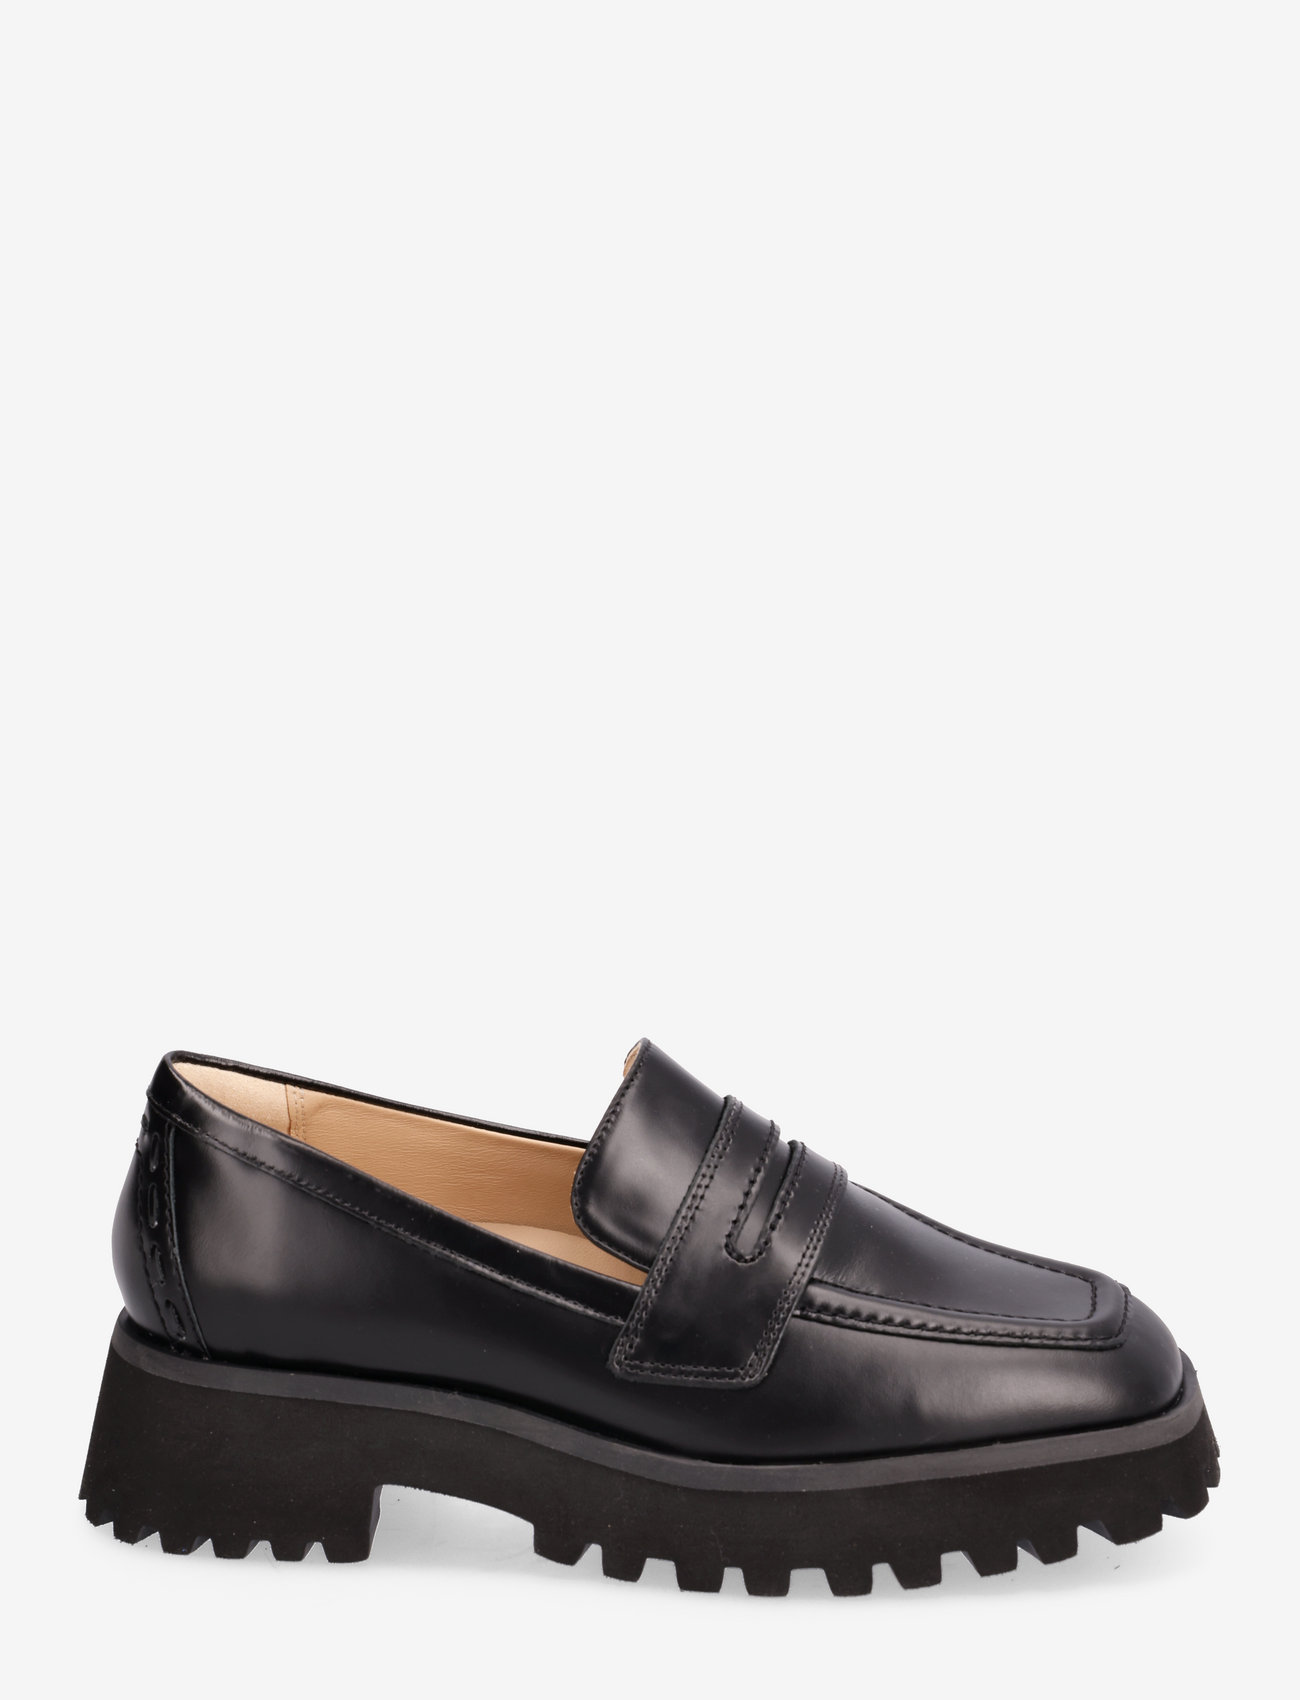 Clarks - Stayso Edge - birthday gifts - black leather - 1